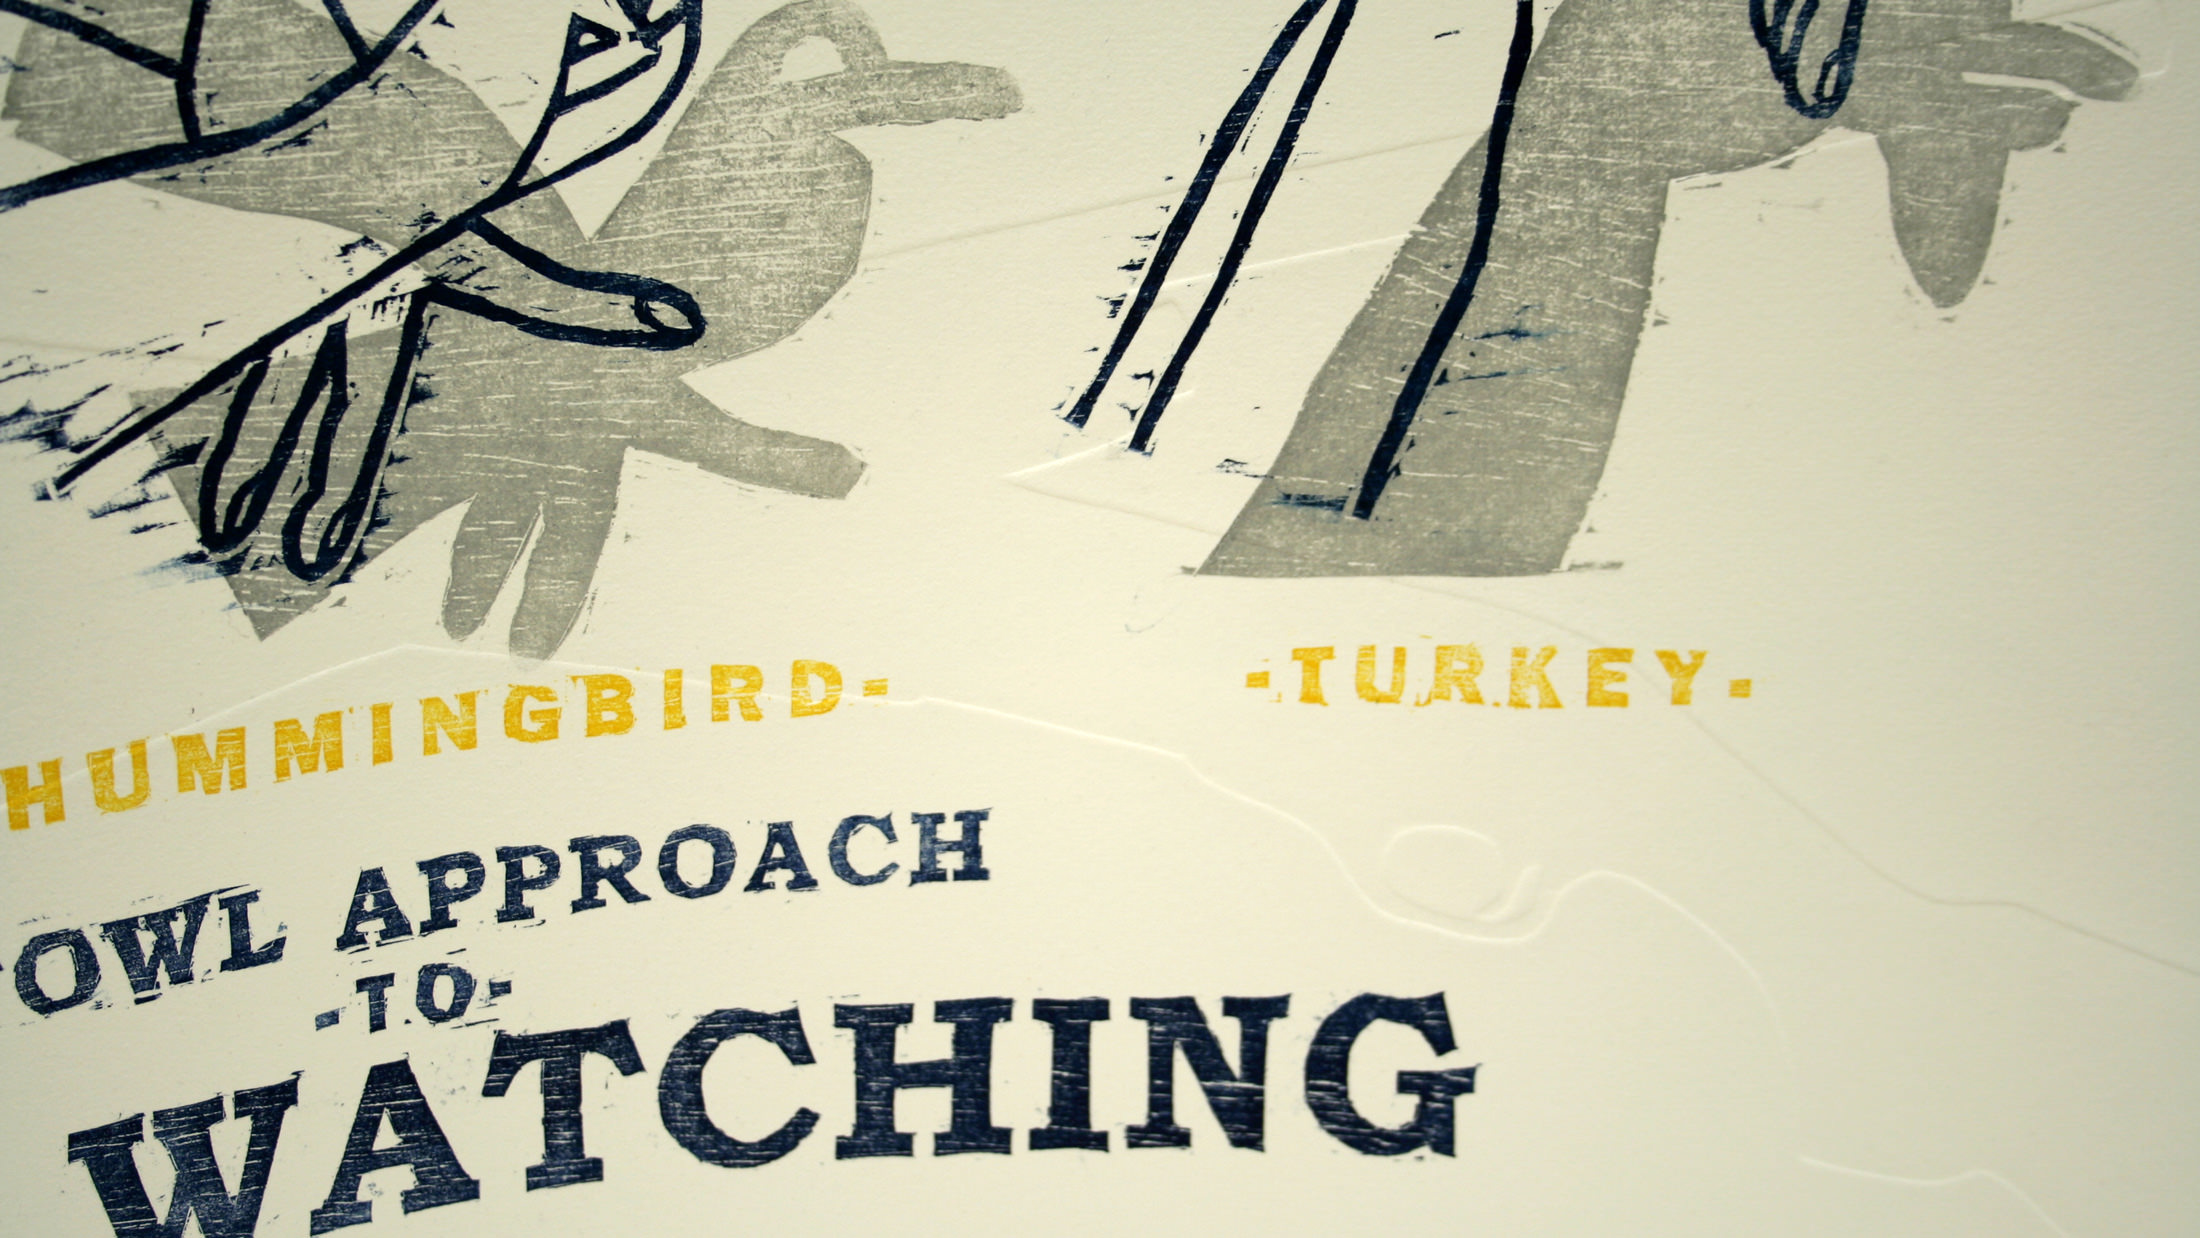 Poster image showing the Fowl Approach to Bird Watching print being held.